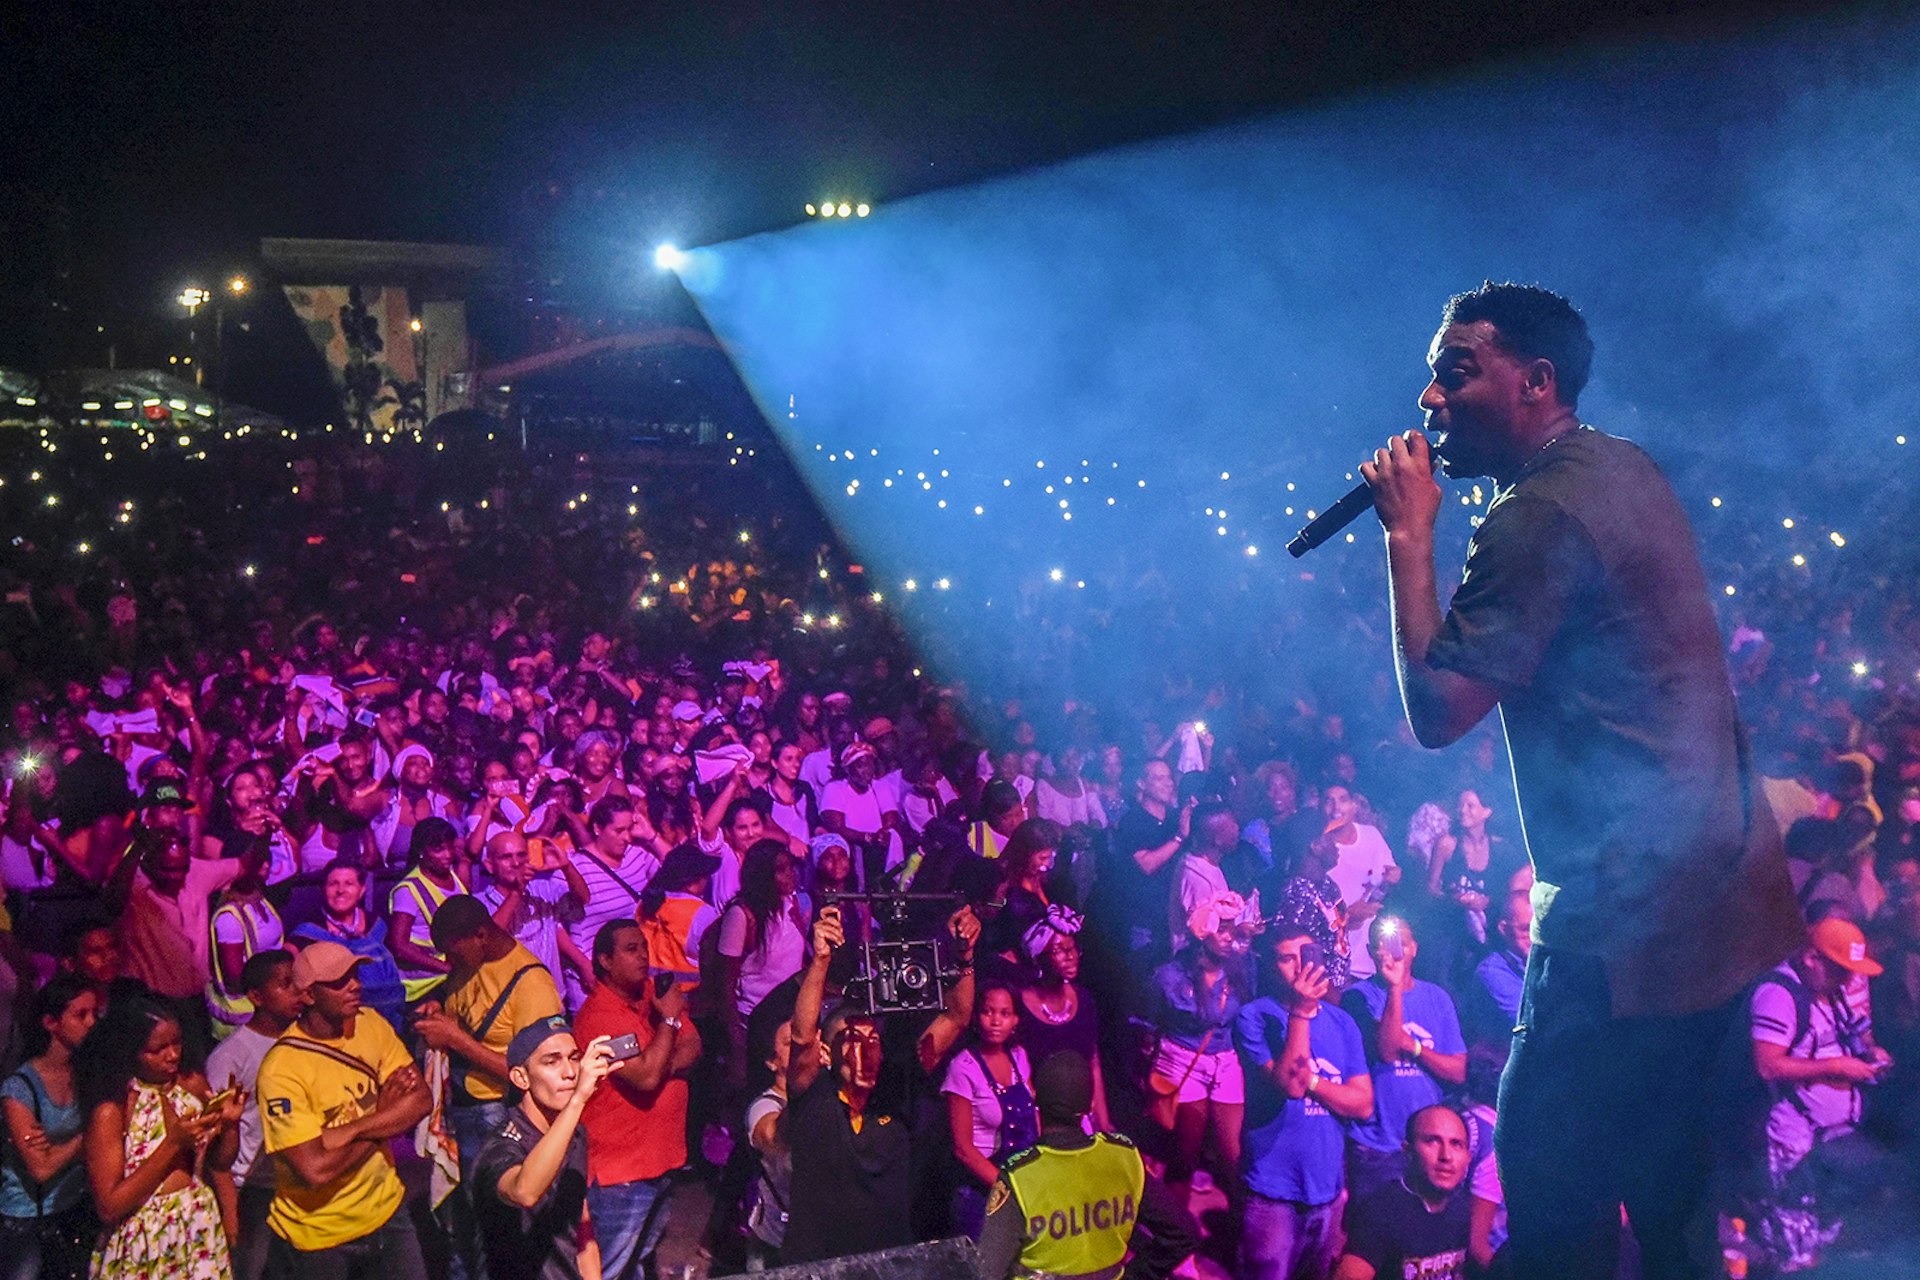 A man in a spotlight sings to a large crowd during the Petronio Alvarez festival